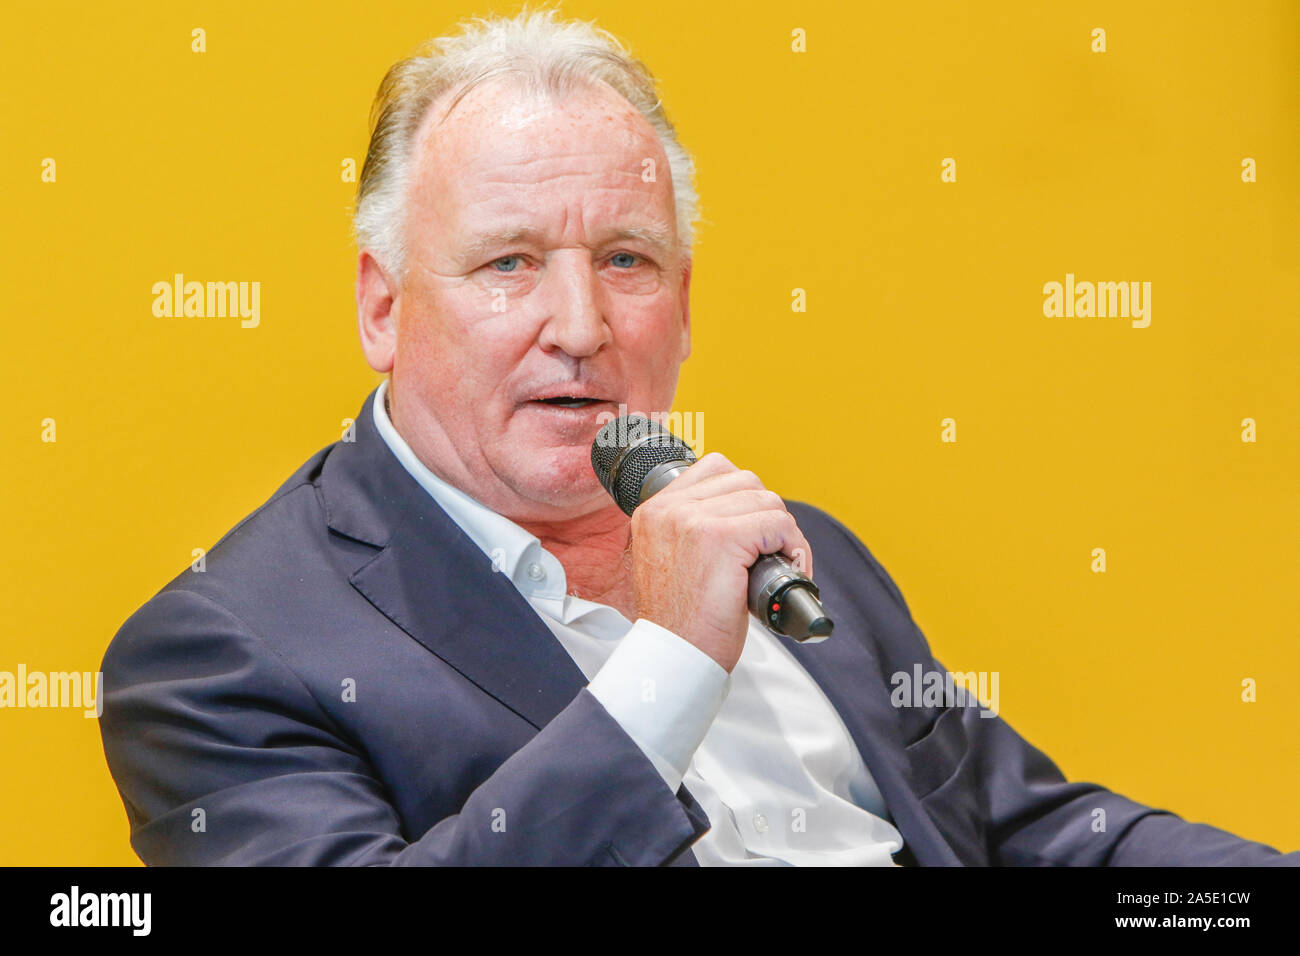 Former German football player Andreas Brehme talks at the Frankfurt Book Fair. The 71th Frankfurt Book Fair 2019 is the world largest book fair with over 7,500 exhibitors and over 285,000 expected visitors. The Guest of Honour for the 2019 fair is Norway. (Photo by Michael Debets/Pacific Press) Stock Photo